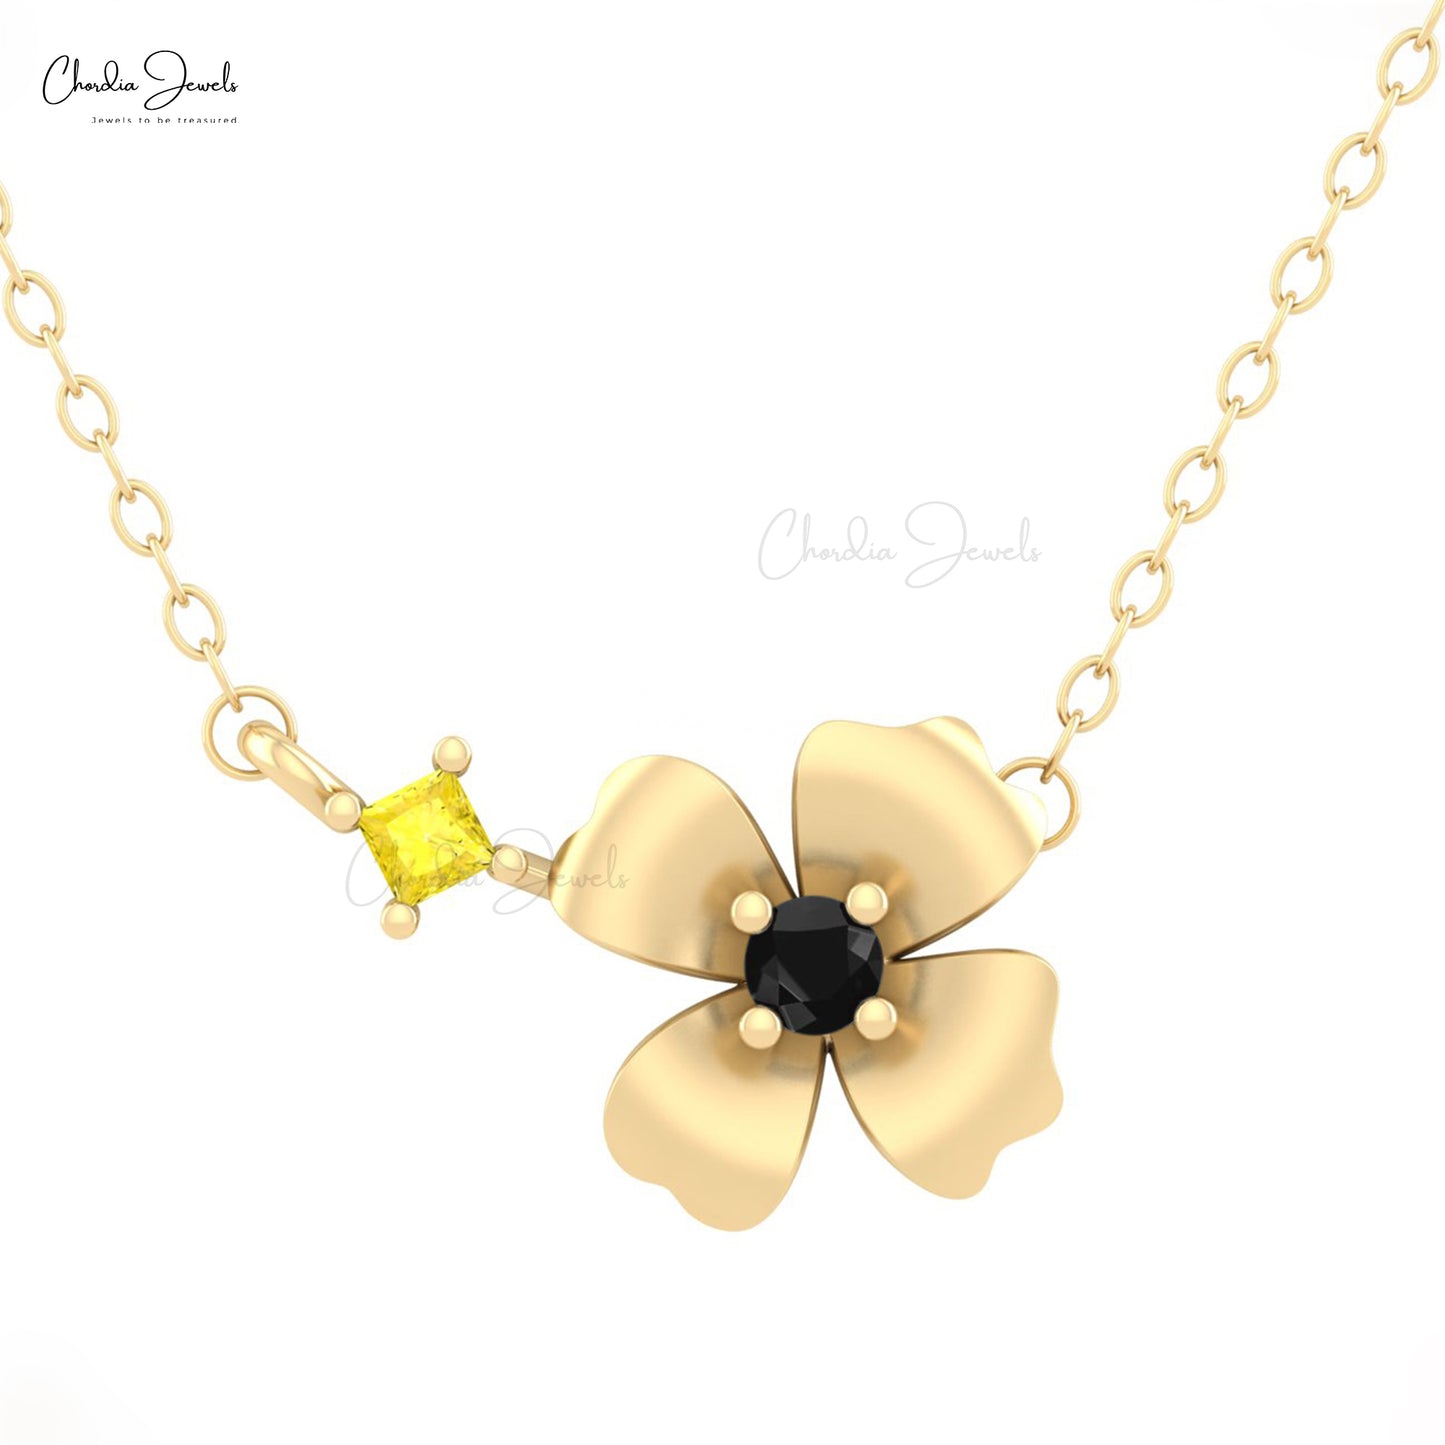 Load image into Gallery viewer, Natural Yellow Sapphire Gemstone Floral Necklace Pendant 0.06 Ct Black Diamond Necklace in 14k Pure Gold Hallmarked Jewelry For Women
